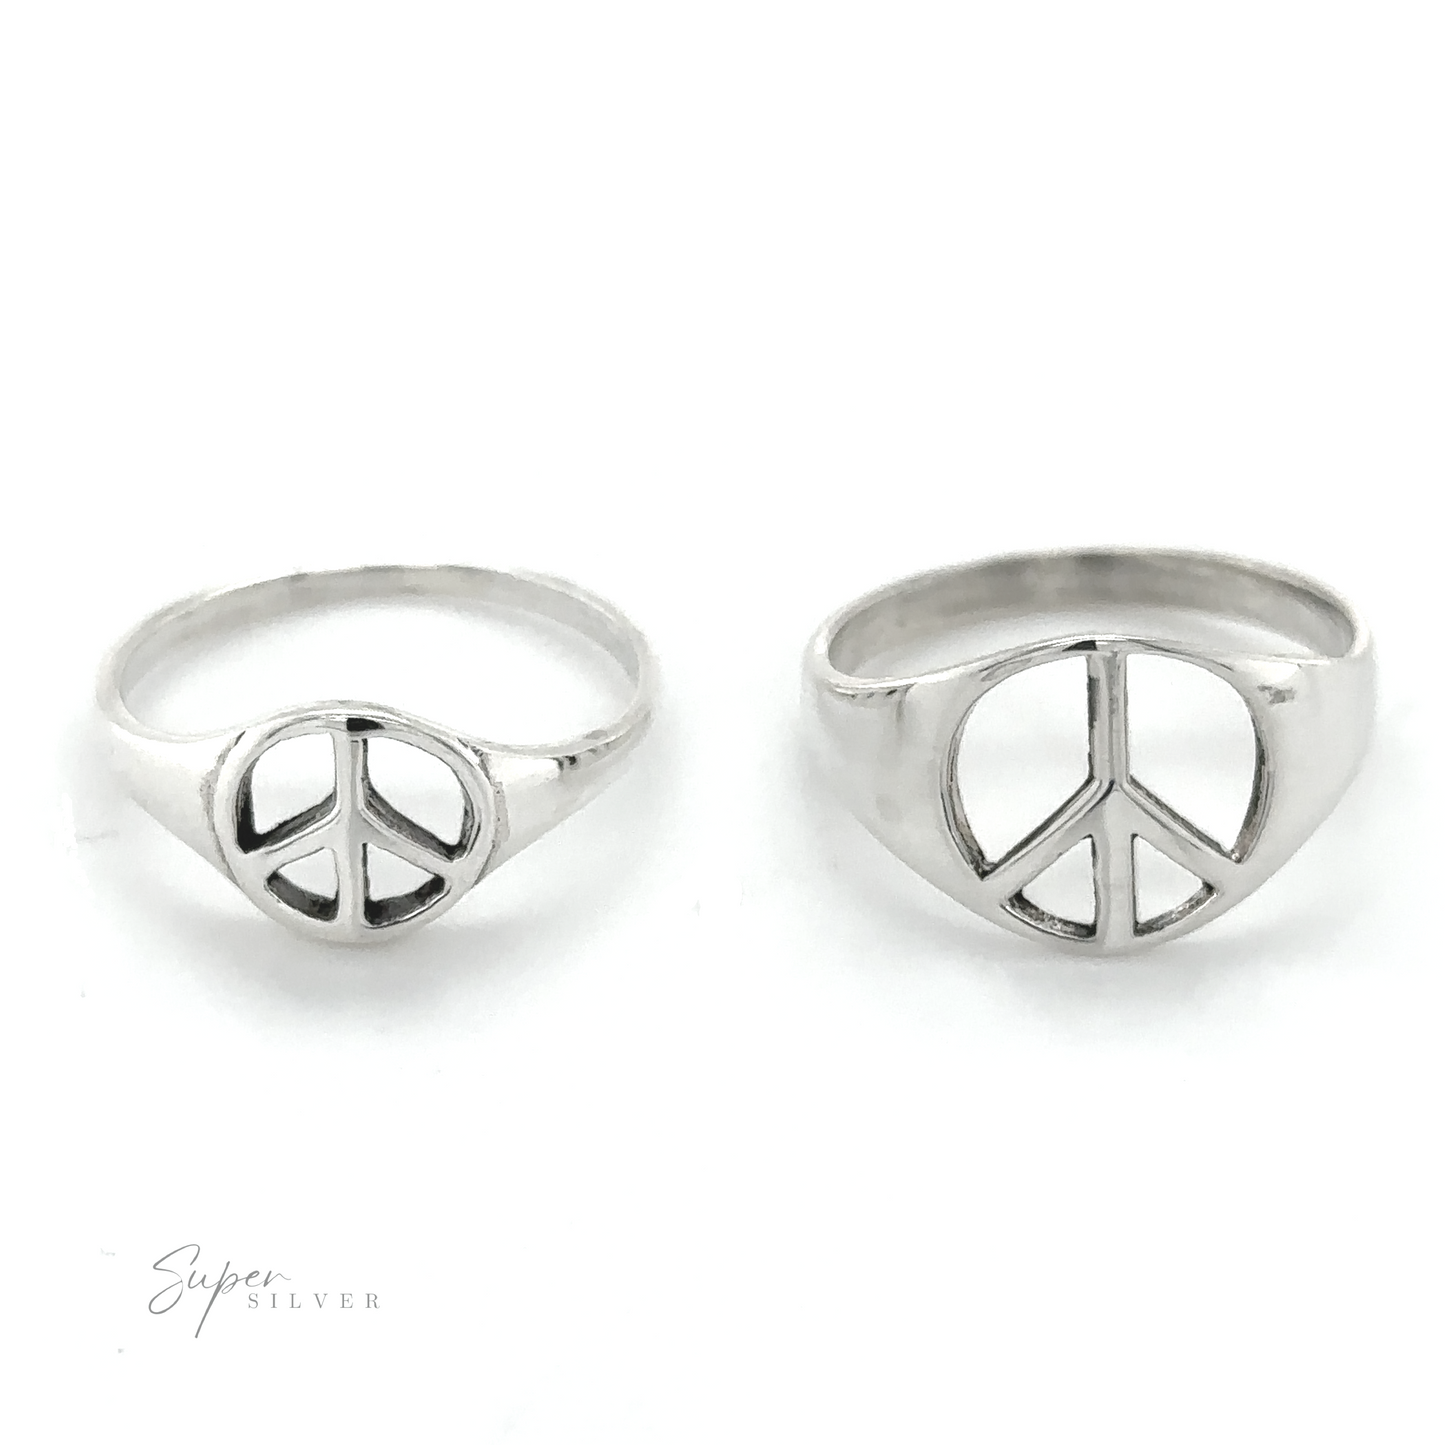 Two tapered style silver peace rings symbolizing unity and harmony.